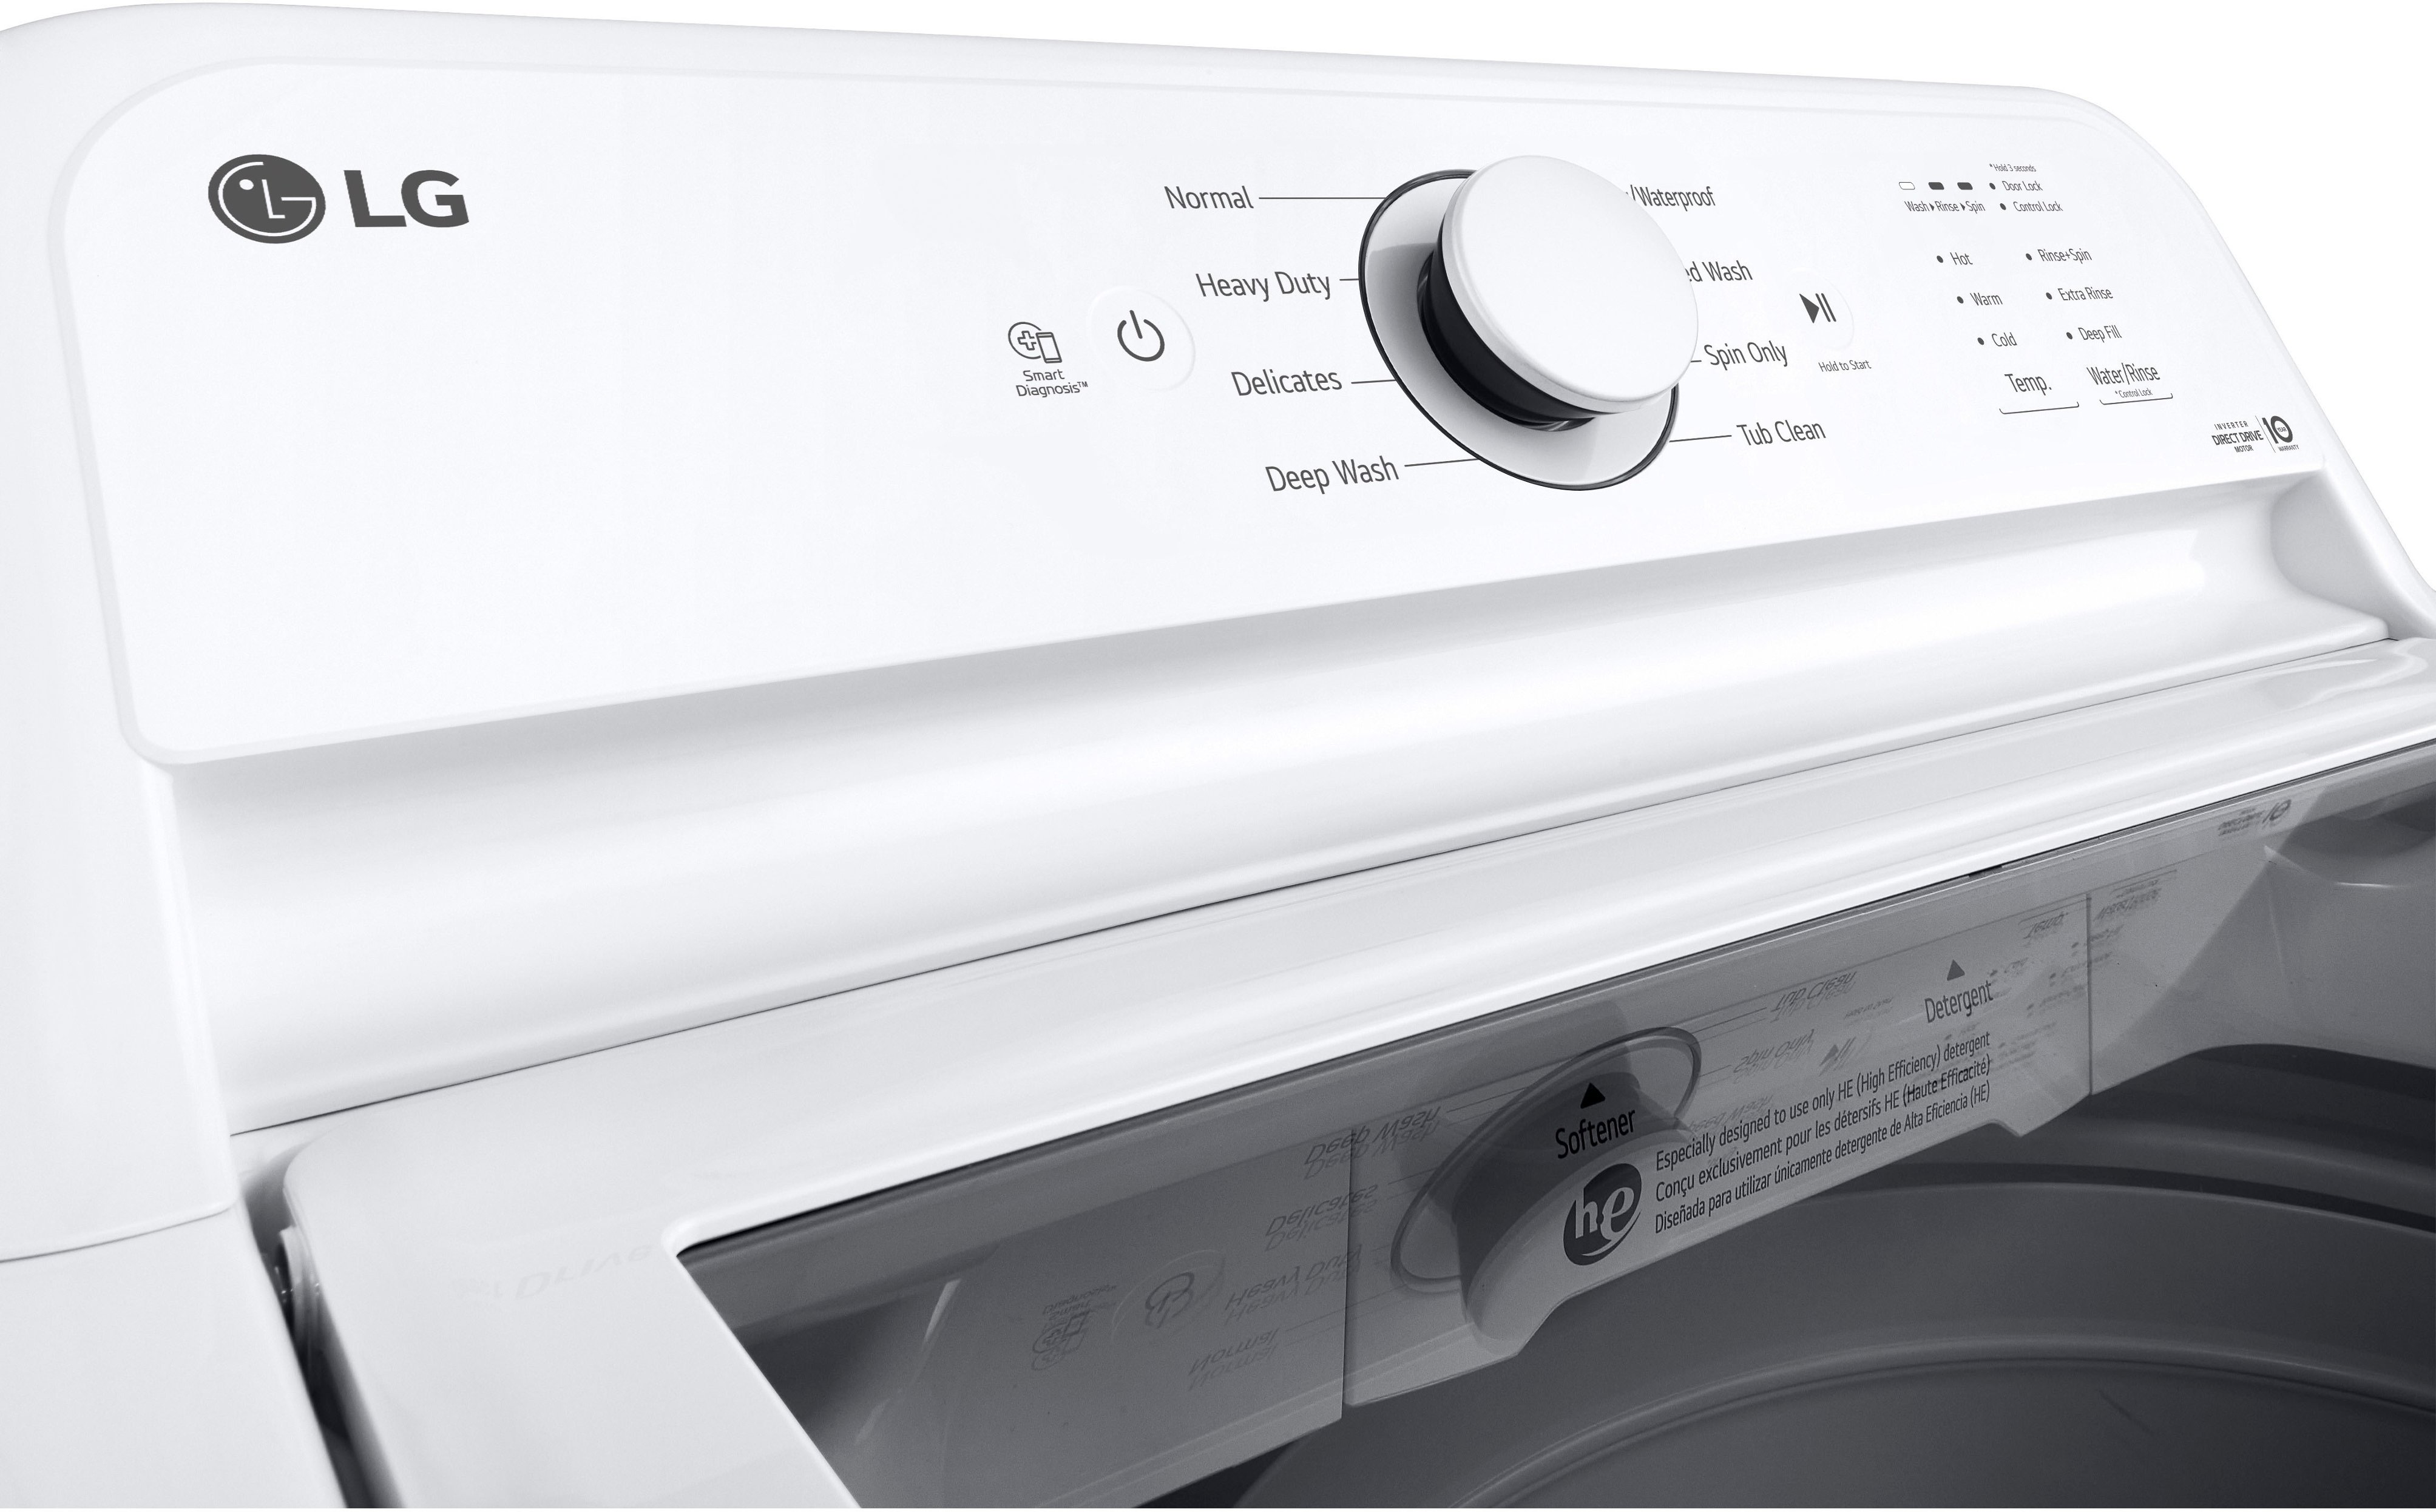 WT901CW by LG - 3.3 CU. FT. EXTRA LARGE CAPACITY TOP LOAD WASHER